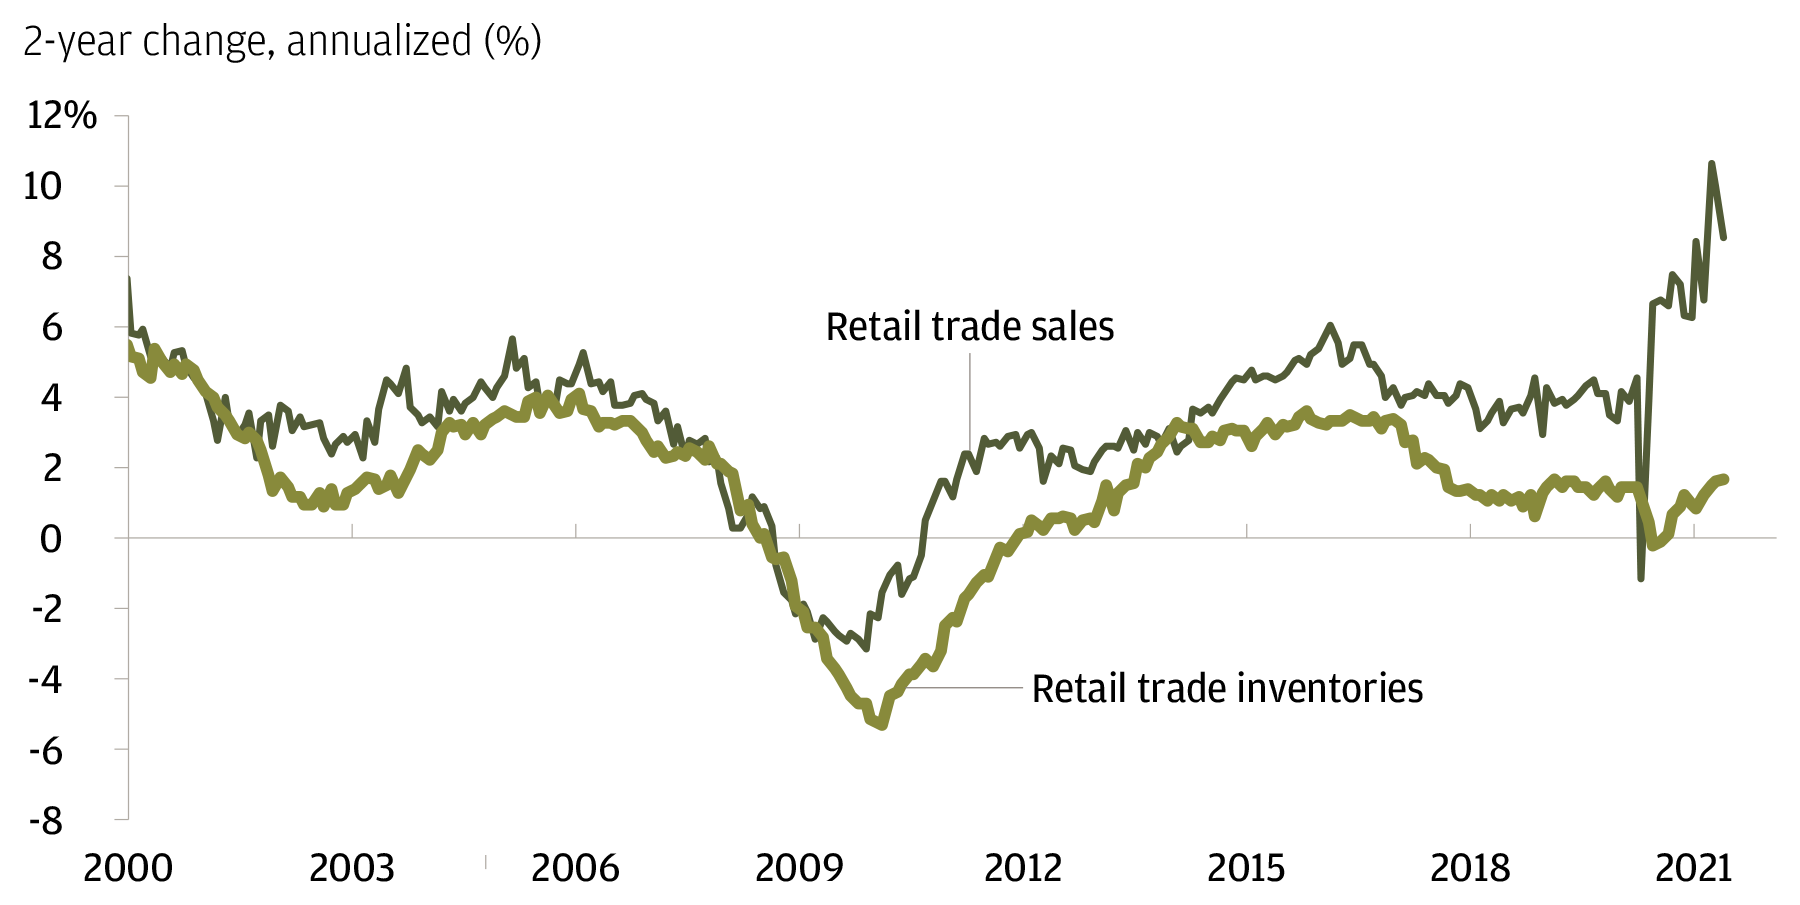 This chart shows the 2-year annualized change of retail sales versus inventories (both series exclude autos). Retail sales growth is up 8.5% while inventories are up just 1.7%.